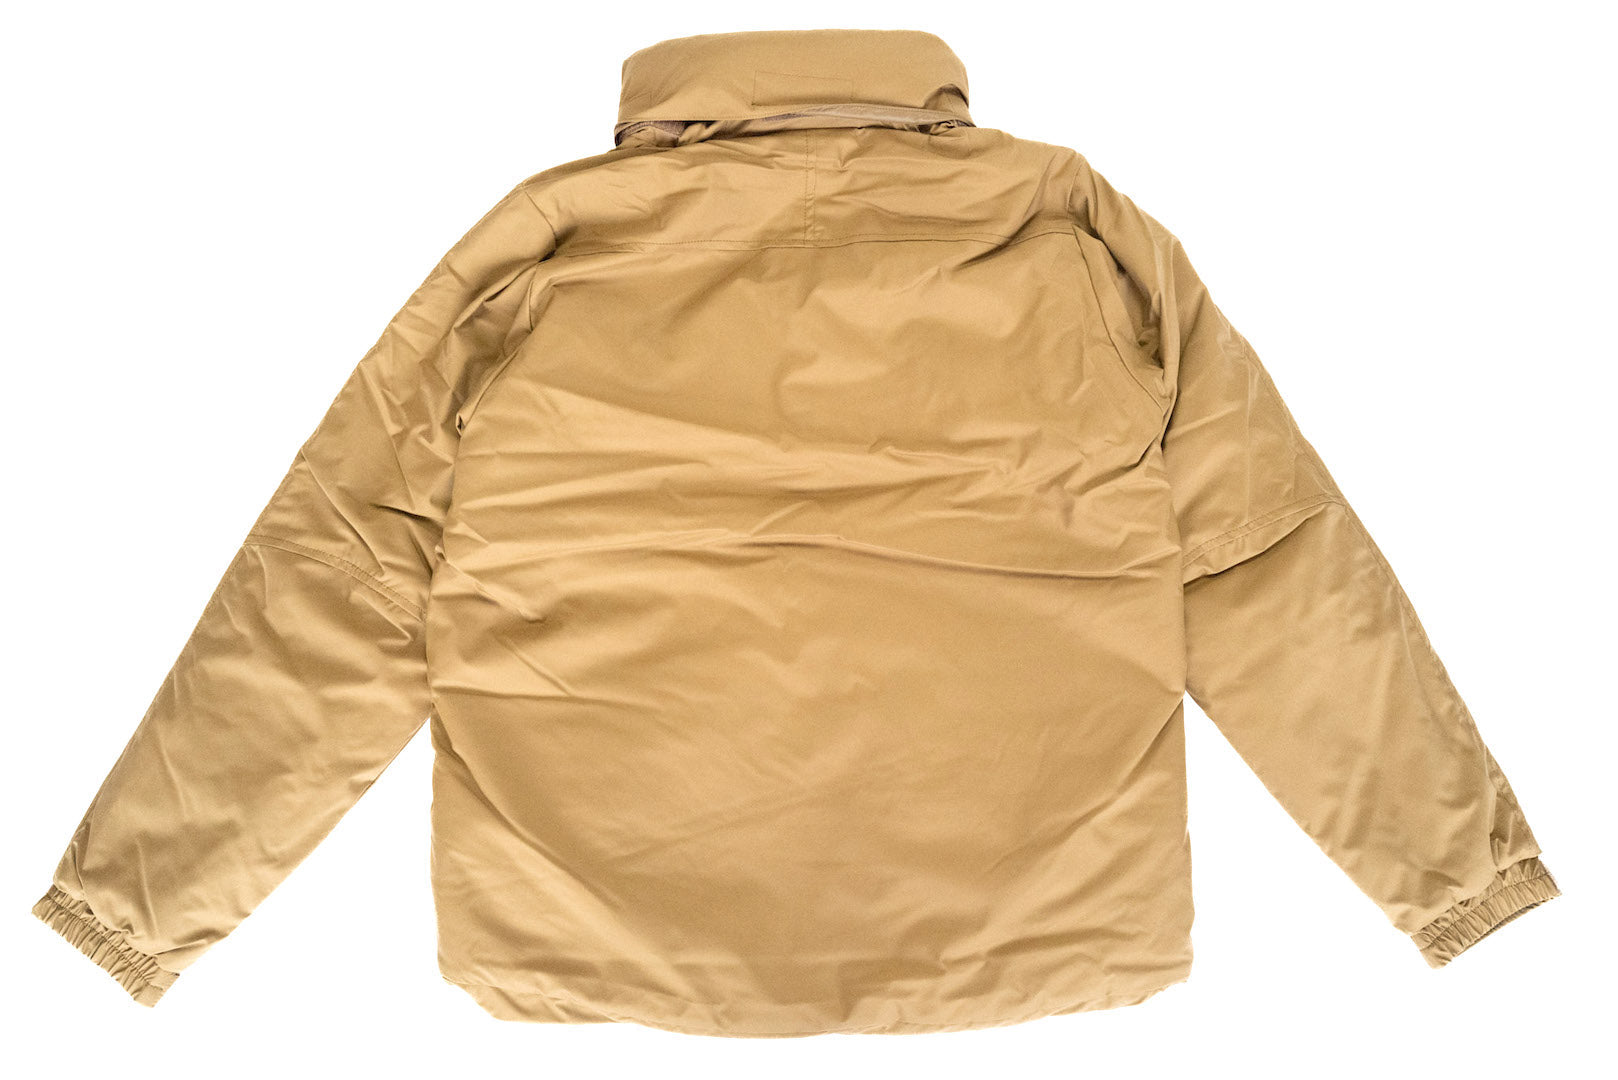 Ultima Thule by Freewheelers "Monster GEN2" Soft Shell Jacket (Coyote)